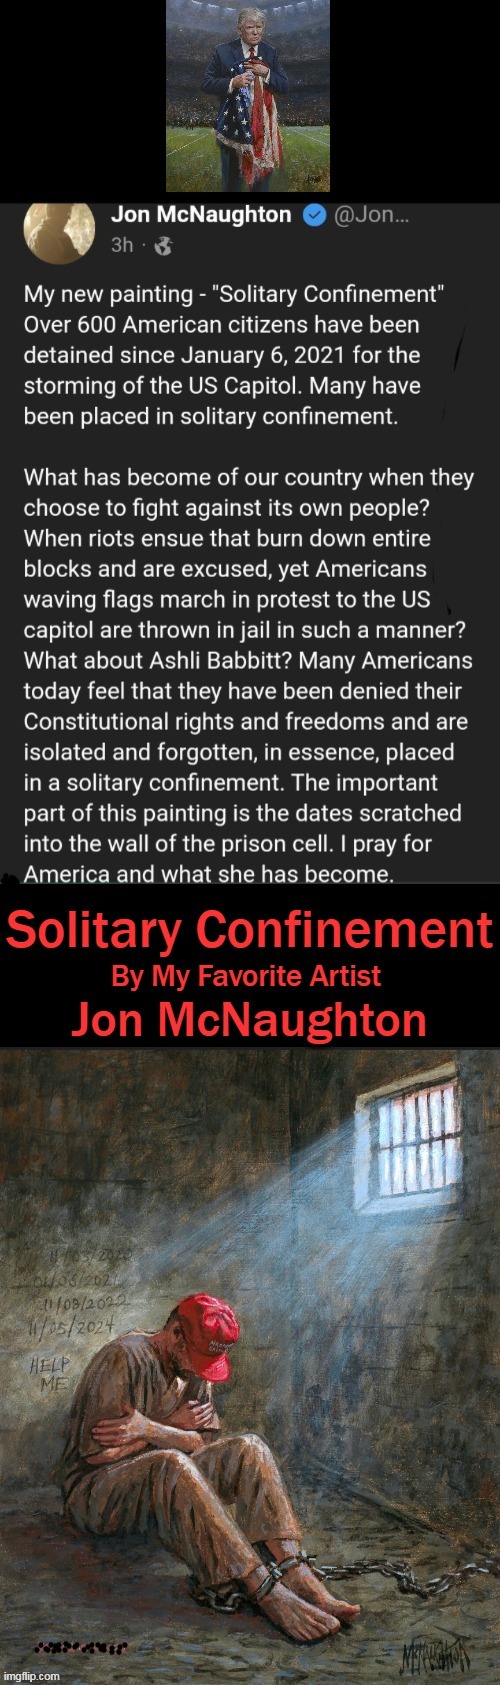 Brought To You By Our Unjust Justice Department; The Tears Are Brought to You by Jon McNaughton | image tagged in politics,democrat party,leftism,solitary confinement,injustice,liberal hypocrisy | made w/ Imgflip meme maker